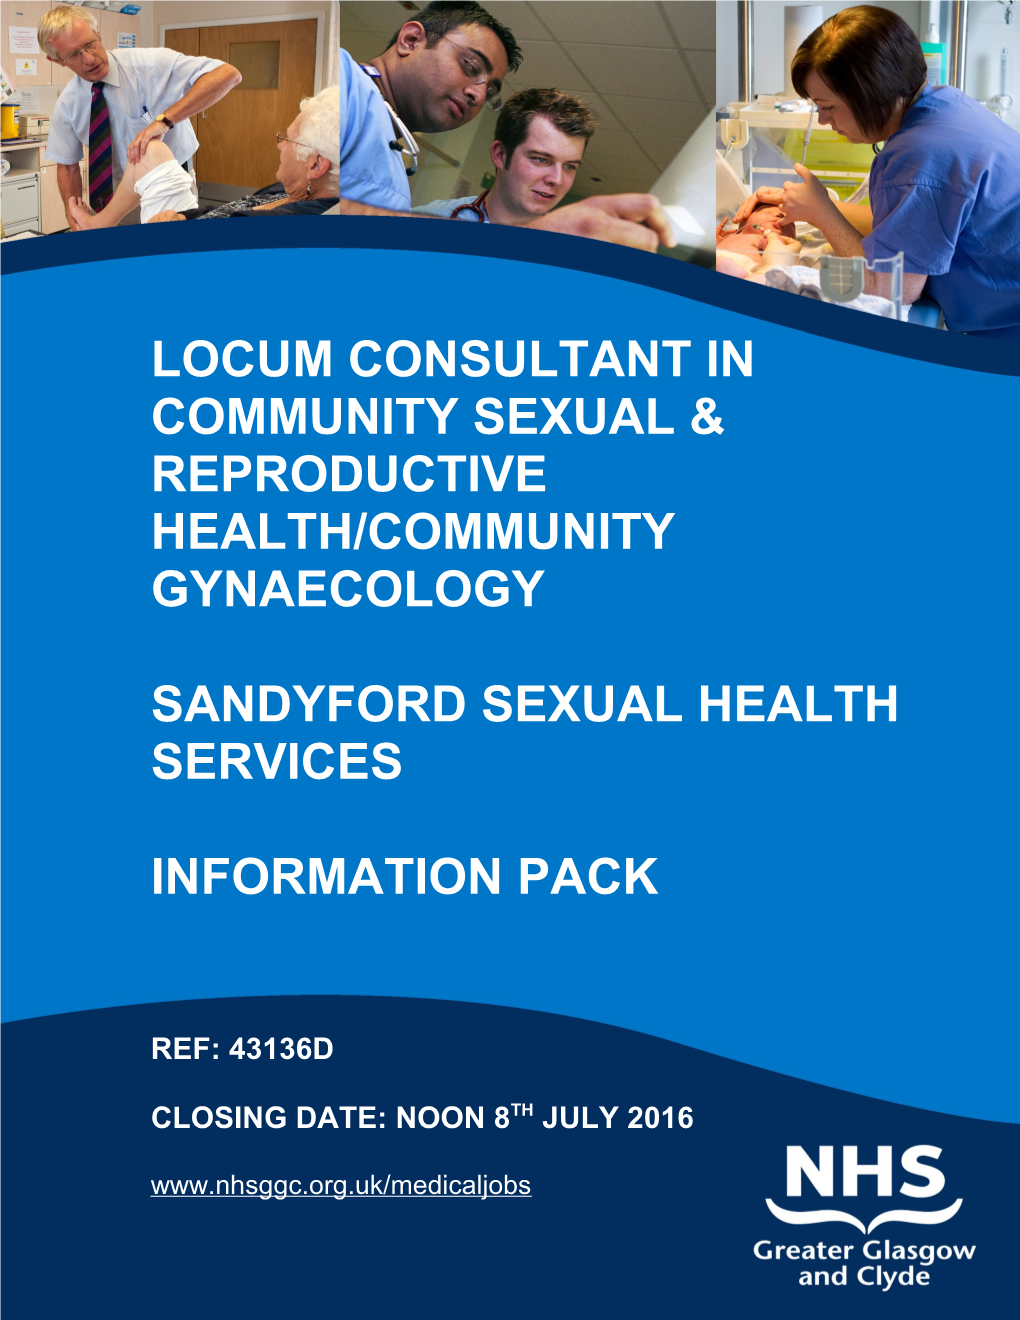 Locum Consultant in Community Sexual & Reproductive Health/Community Gynaecology